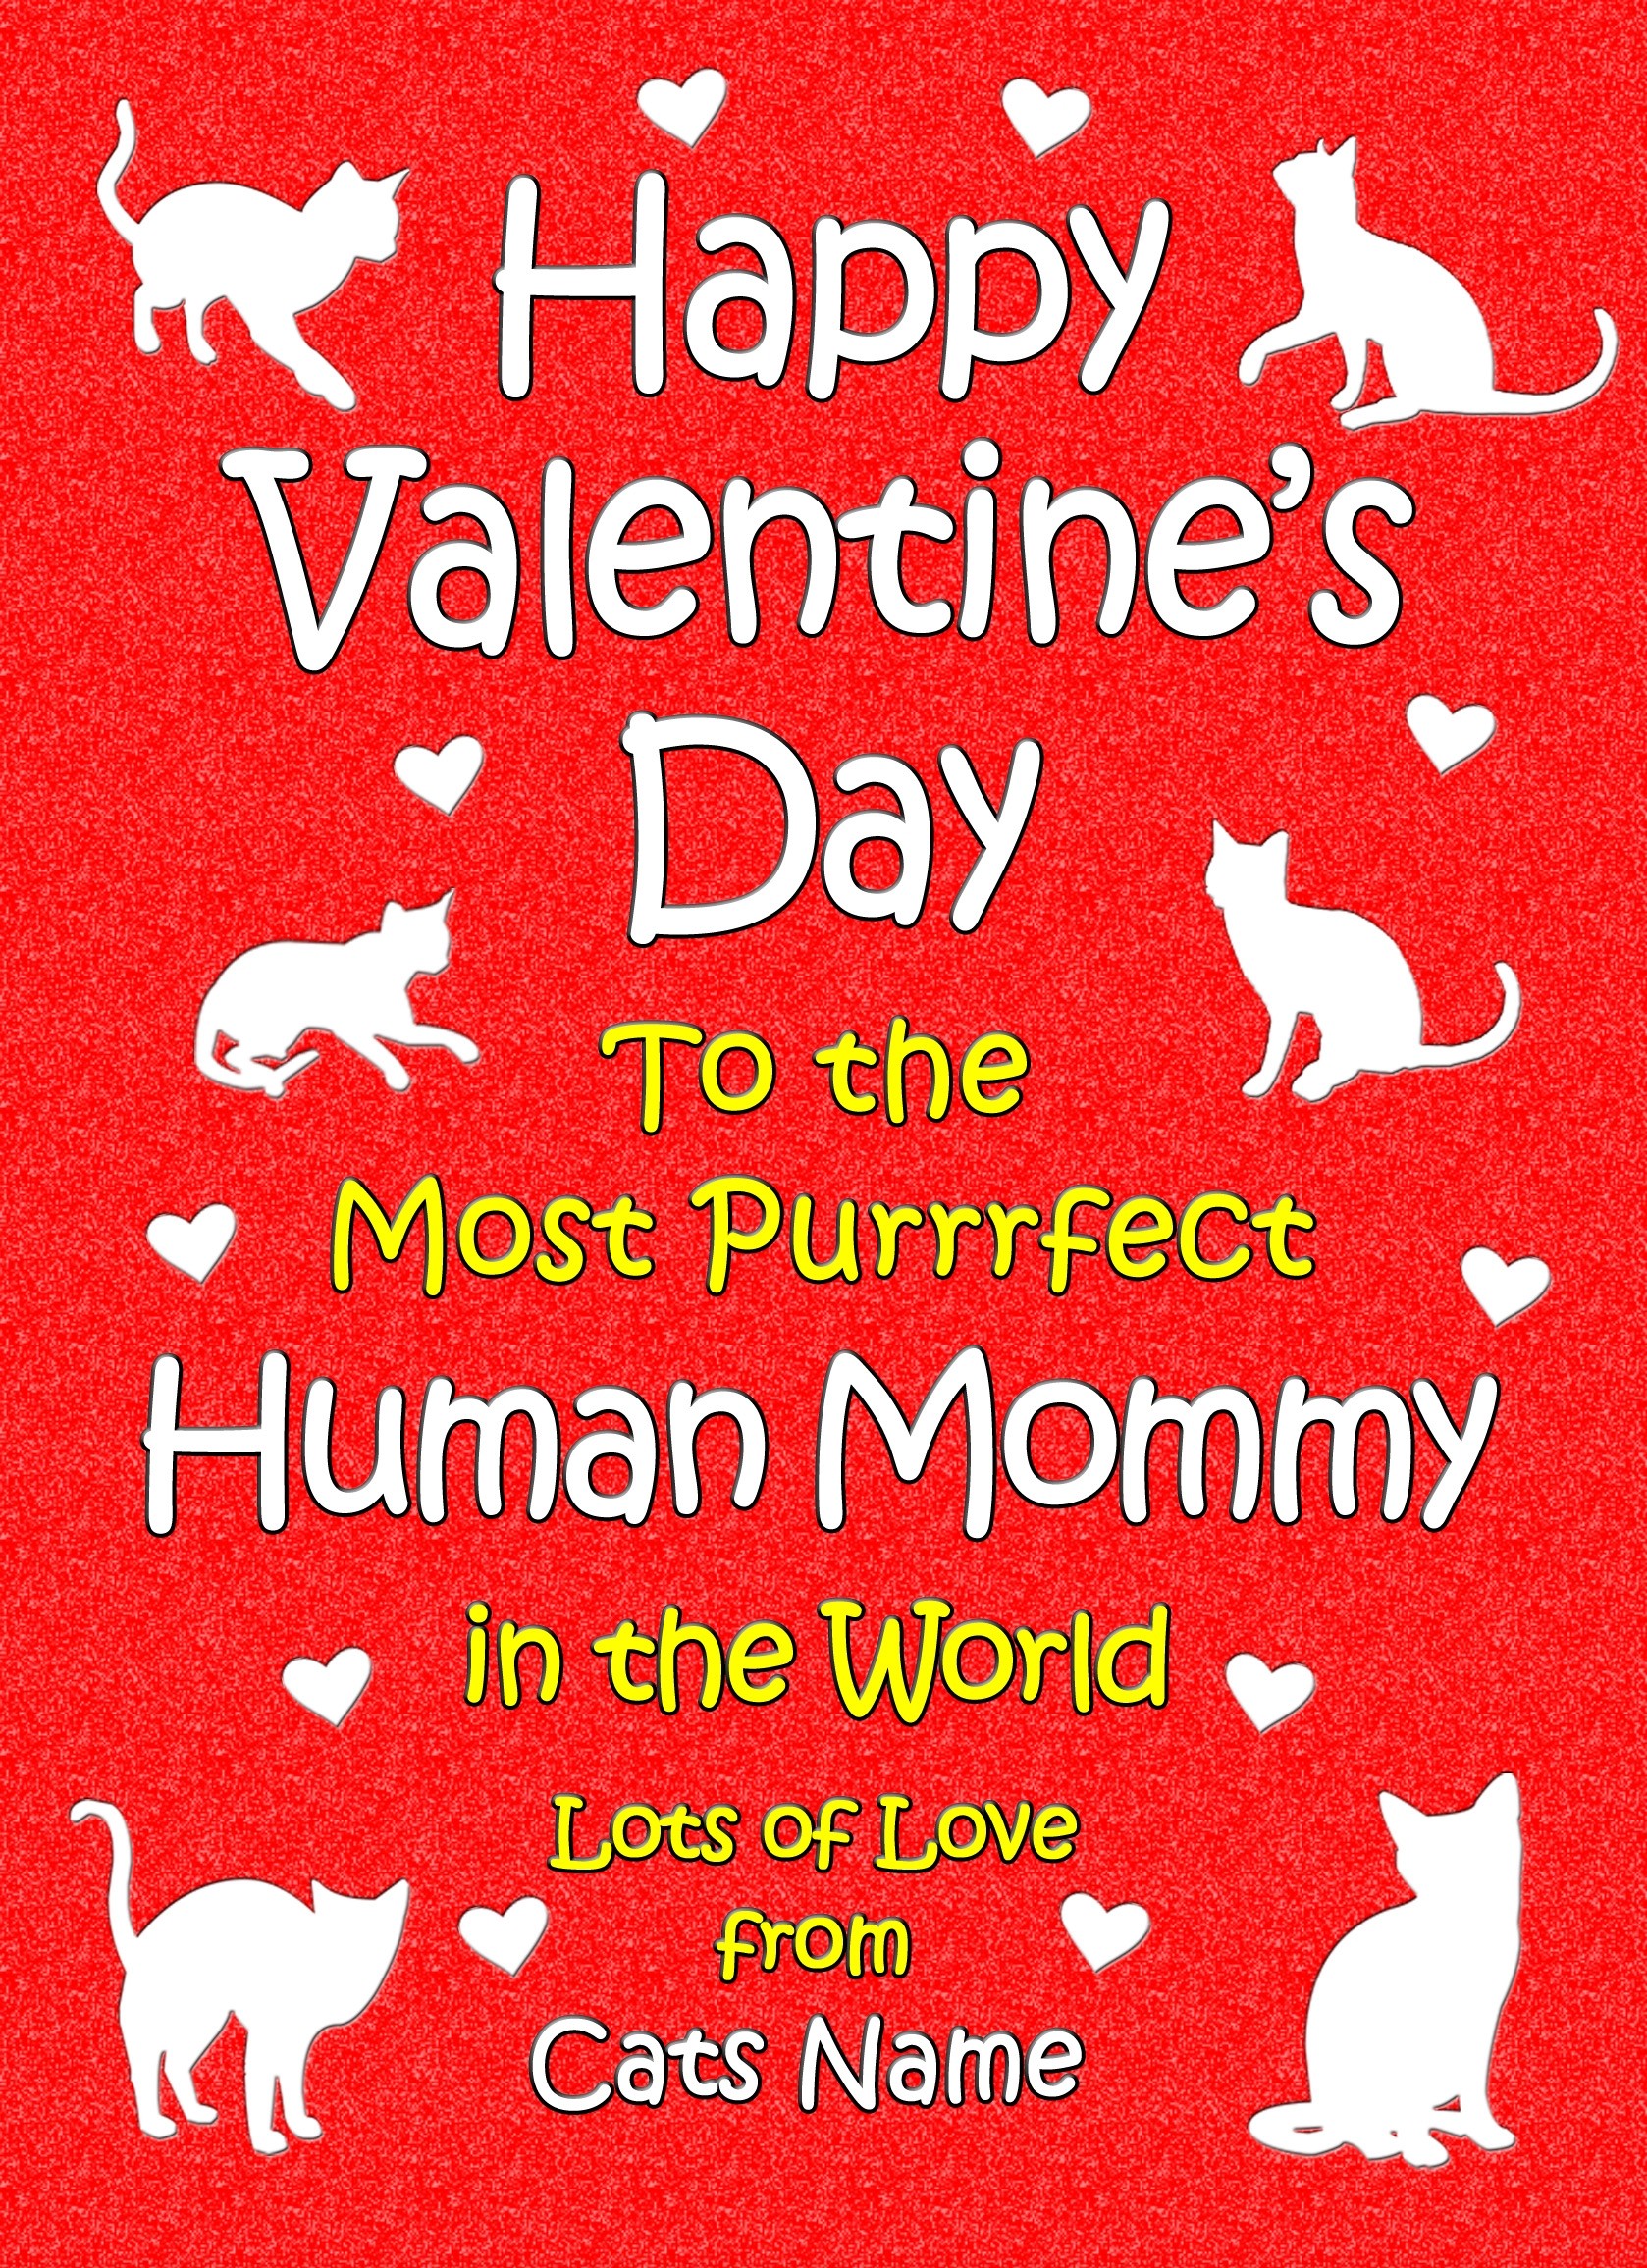 Personalised From The Cat Valentines Day Card (Human Mommy)